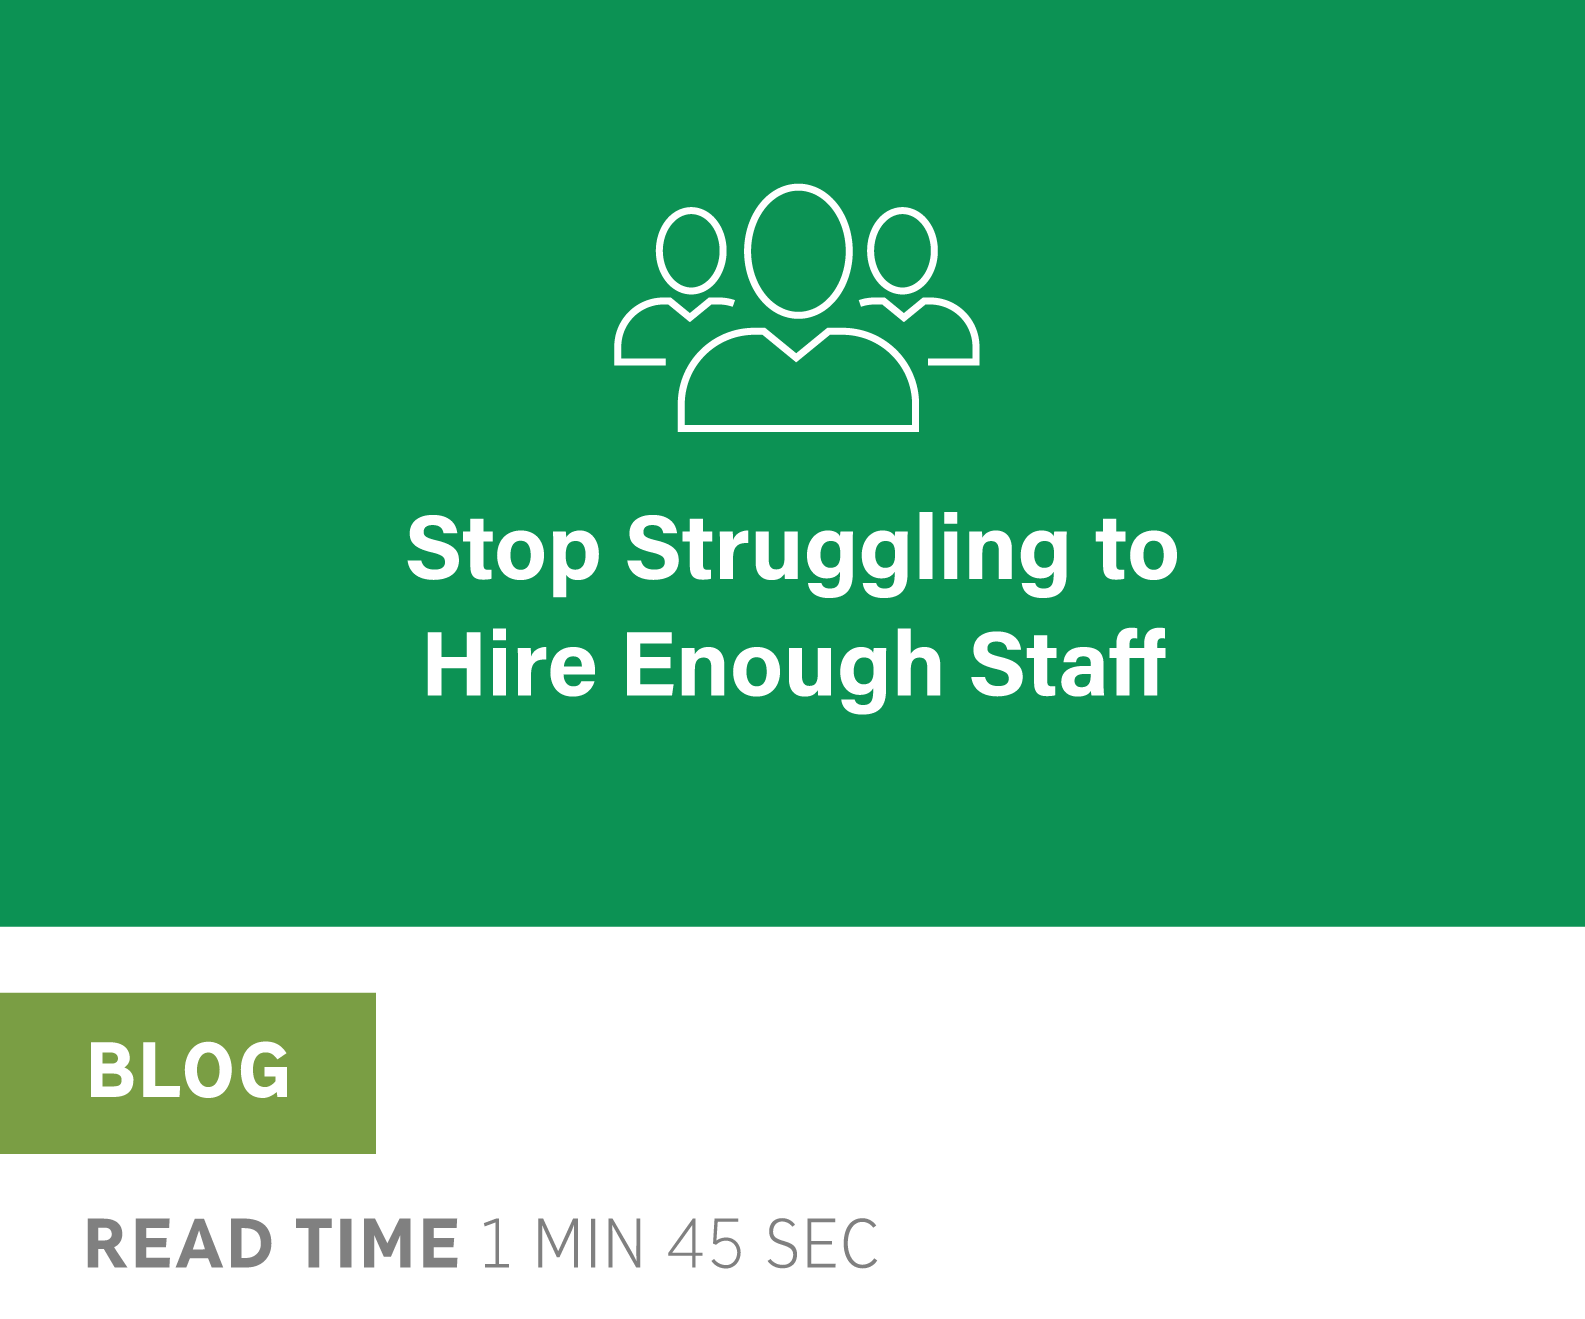 Stop Struggling to Hire Enough Staff